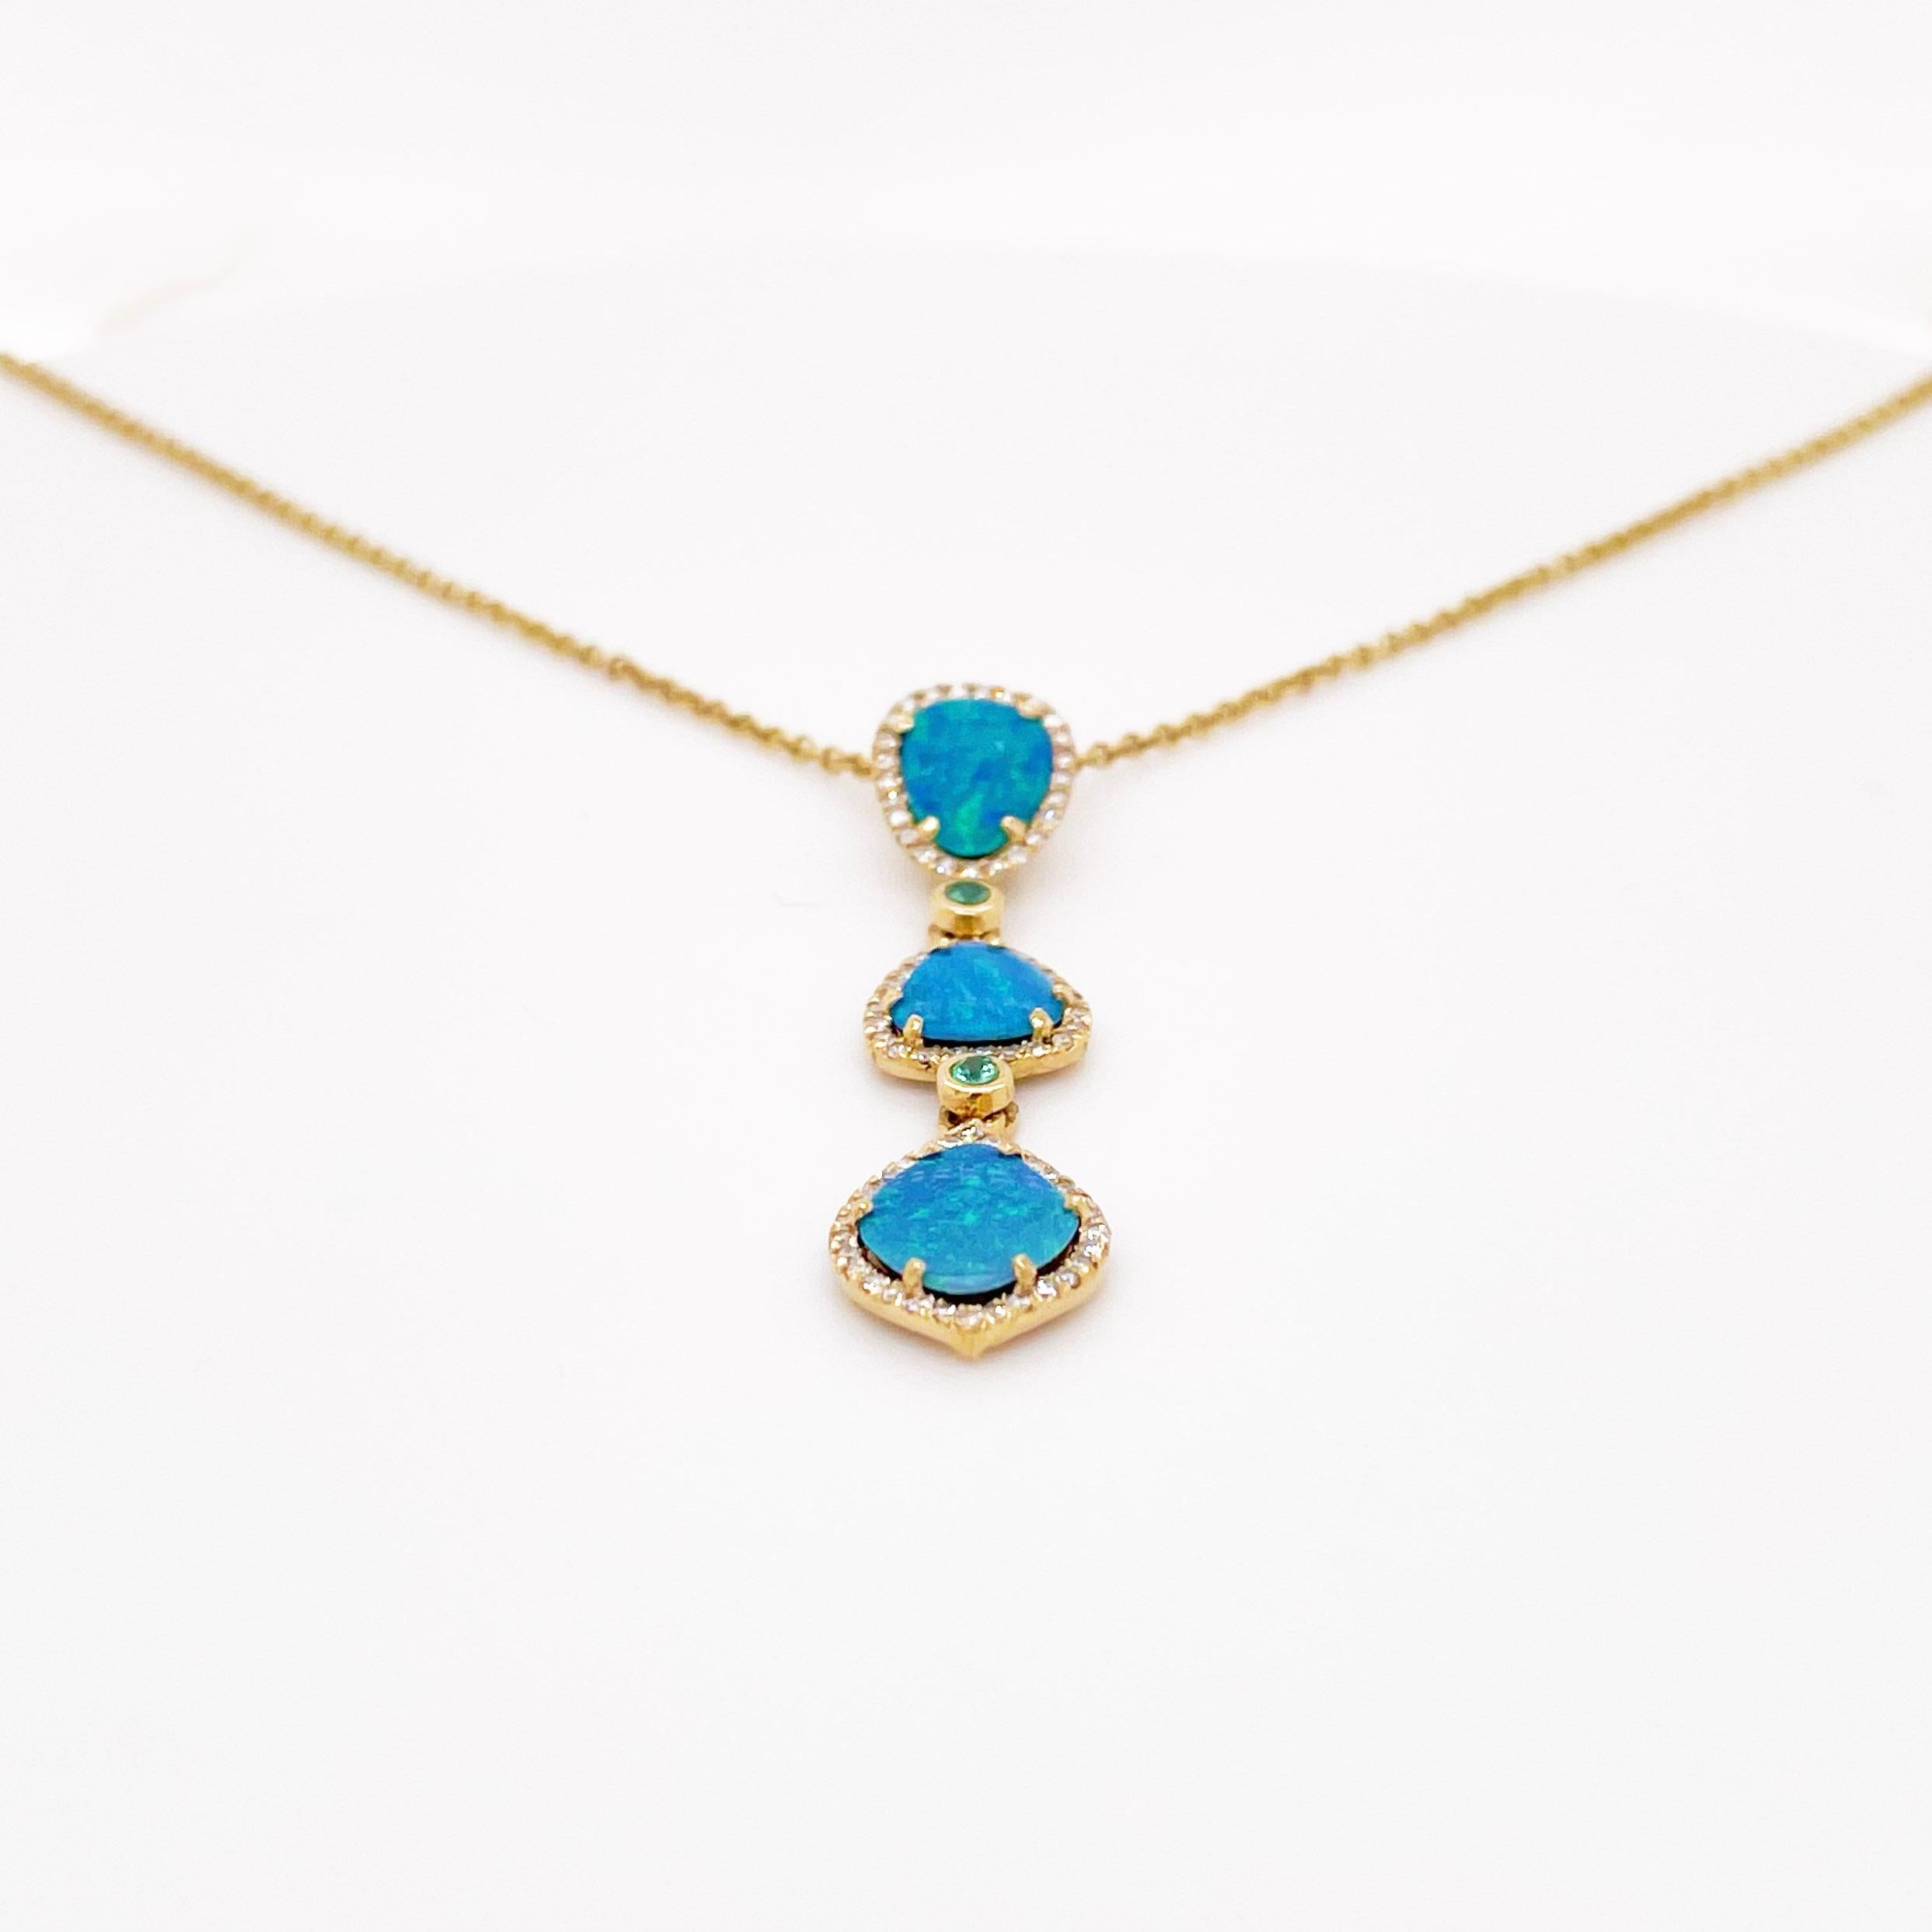 These stunningly beautiful black opal doublets are set in polished 14k yellow gold prongs that are dripping with diamonds. The piece has two beautiful emeralds that provide a look that is very modern yet classic! This necklace is very fashionable